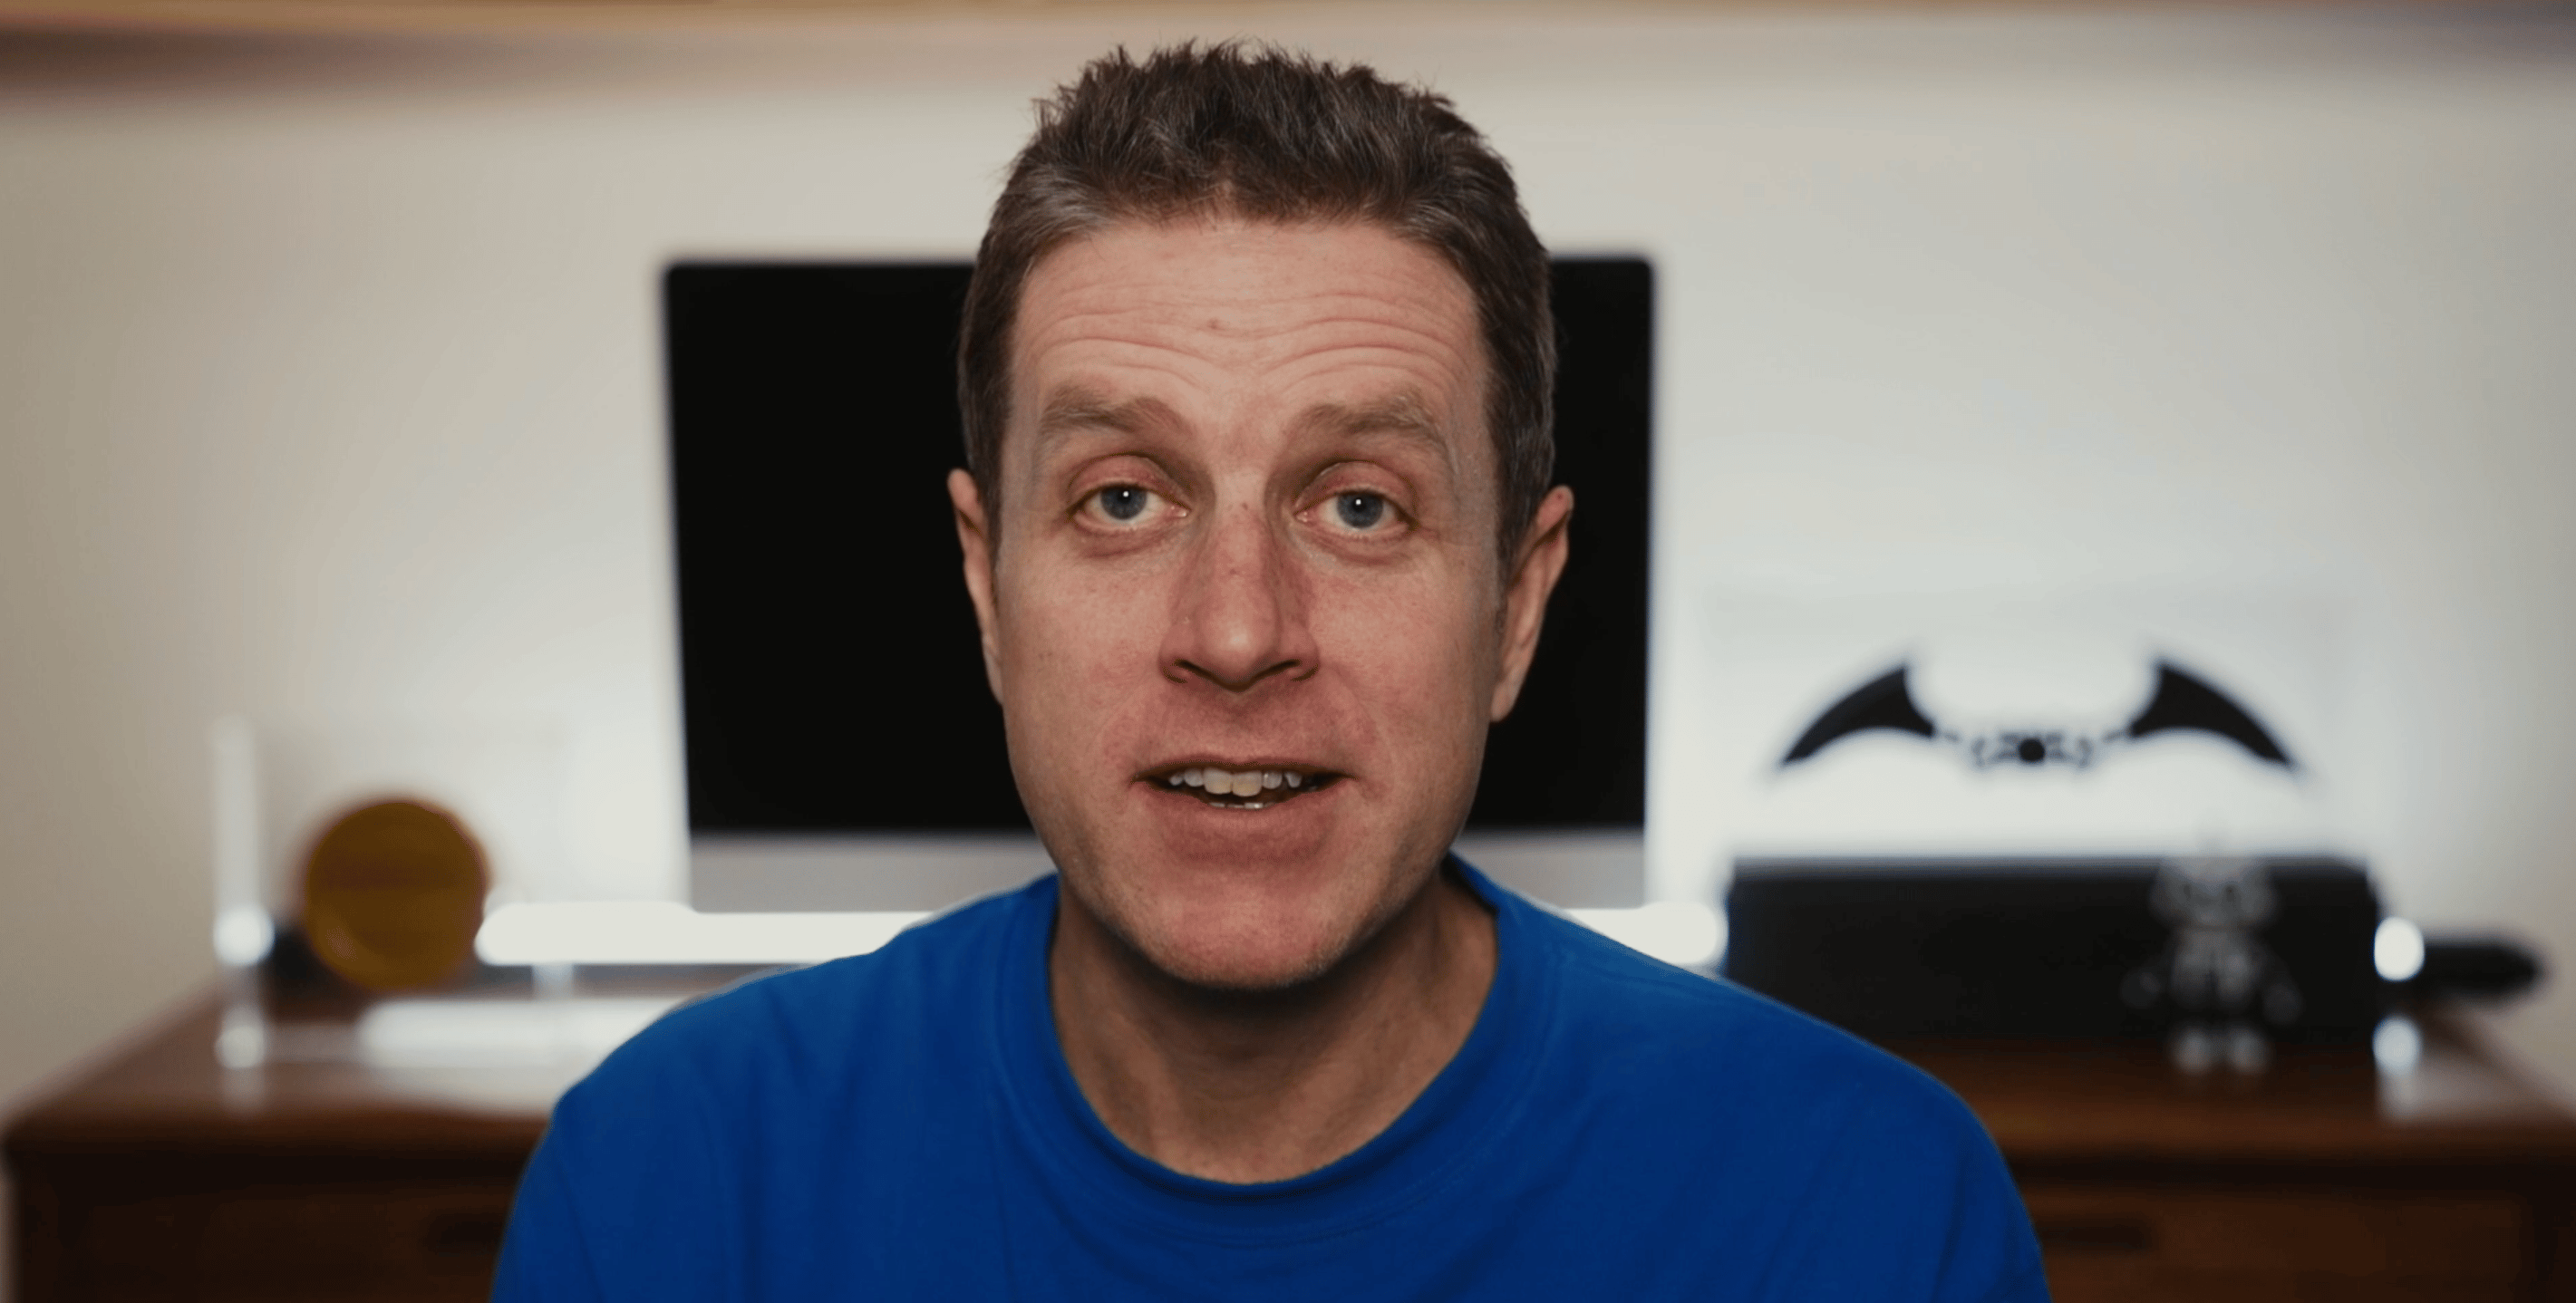 Geoff Keighley sits in his office during a Twitch livestream